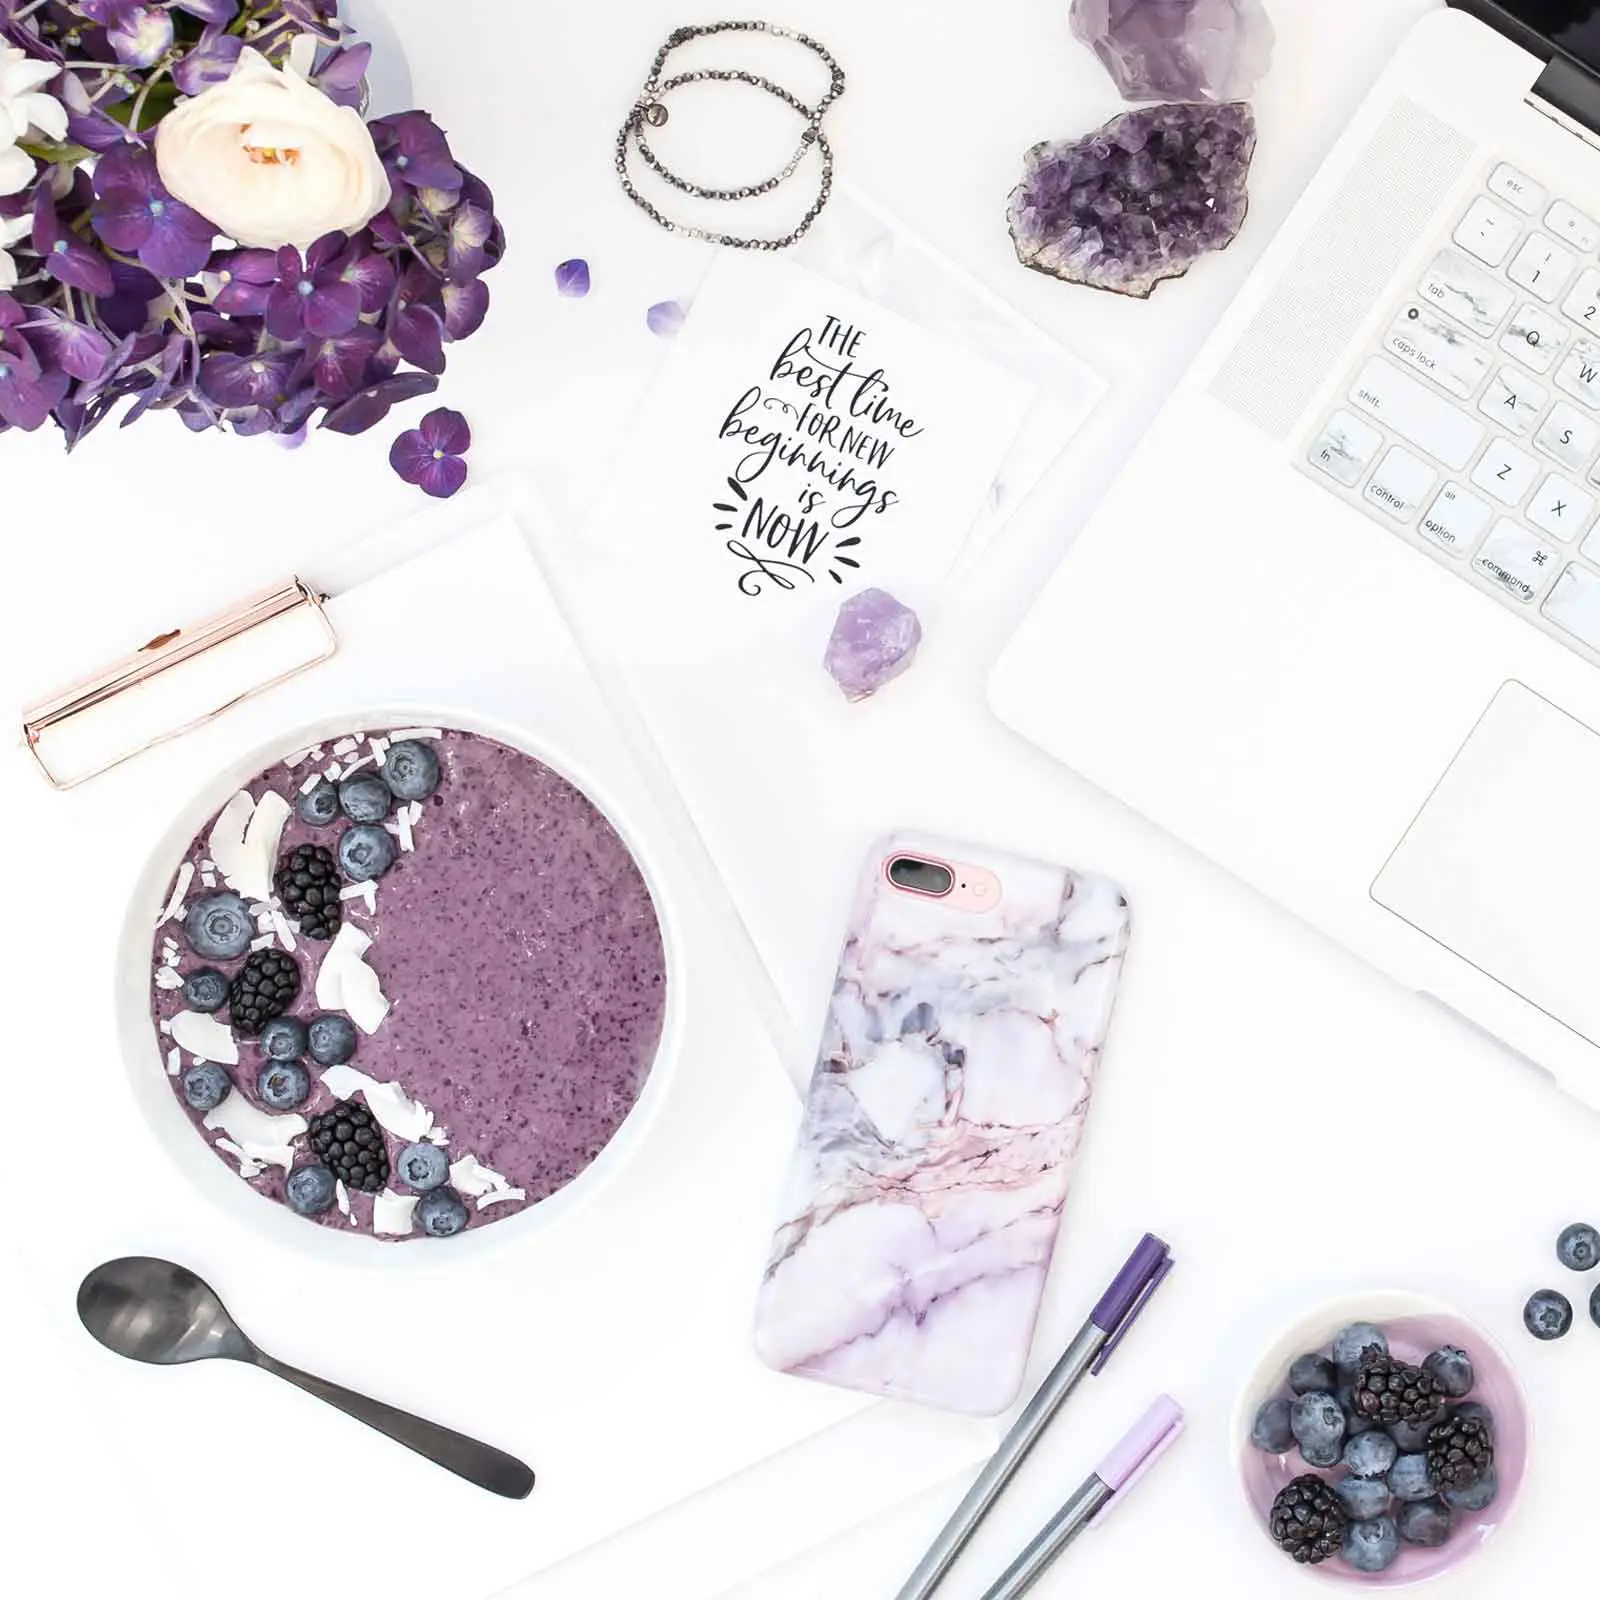 Flat lay photo of a white surface with white and purple objects, such as an amethyst rock, purple flowers, a purple smoothie bowl, a purple marble print phone case, a silver laptop, and purple pens, artfully arranged.